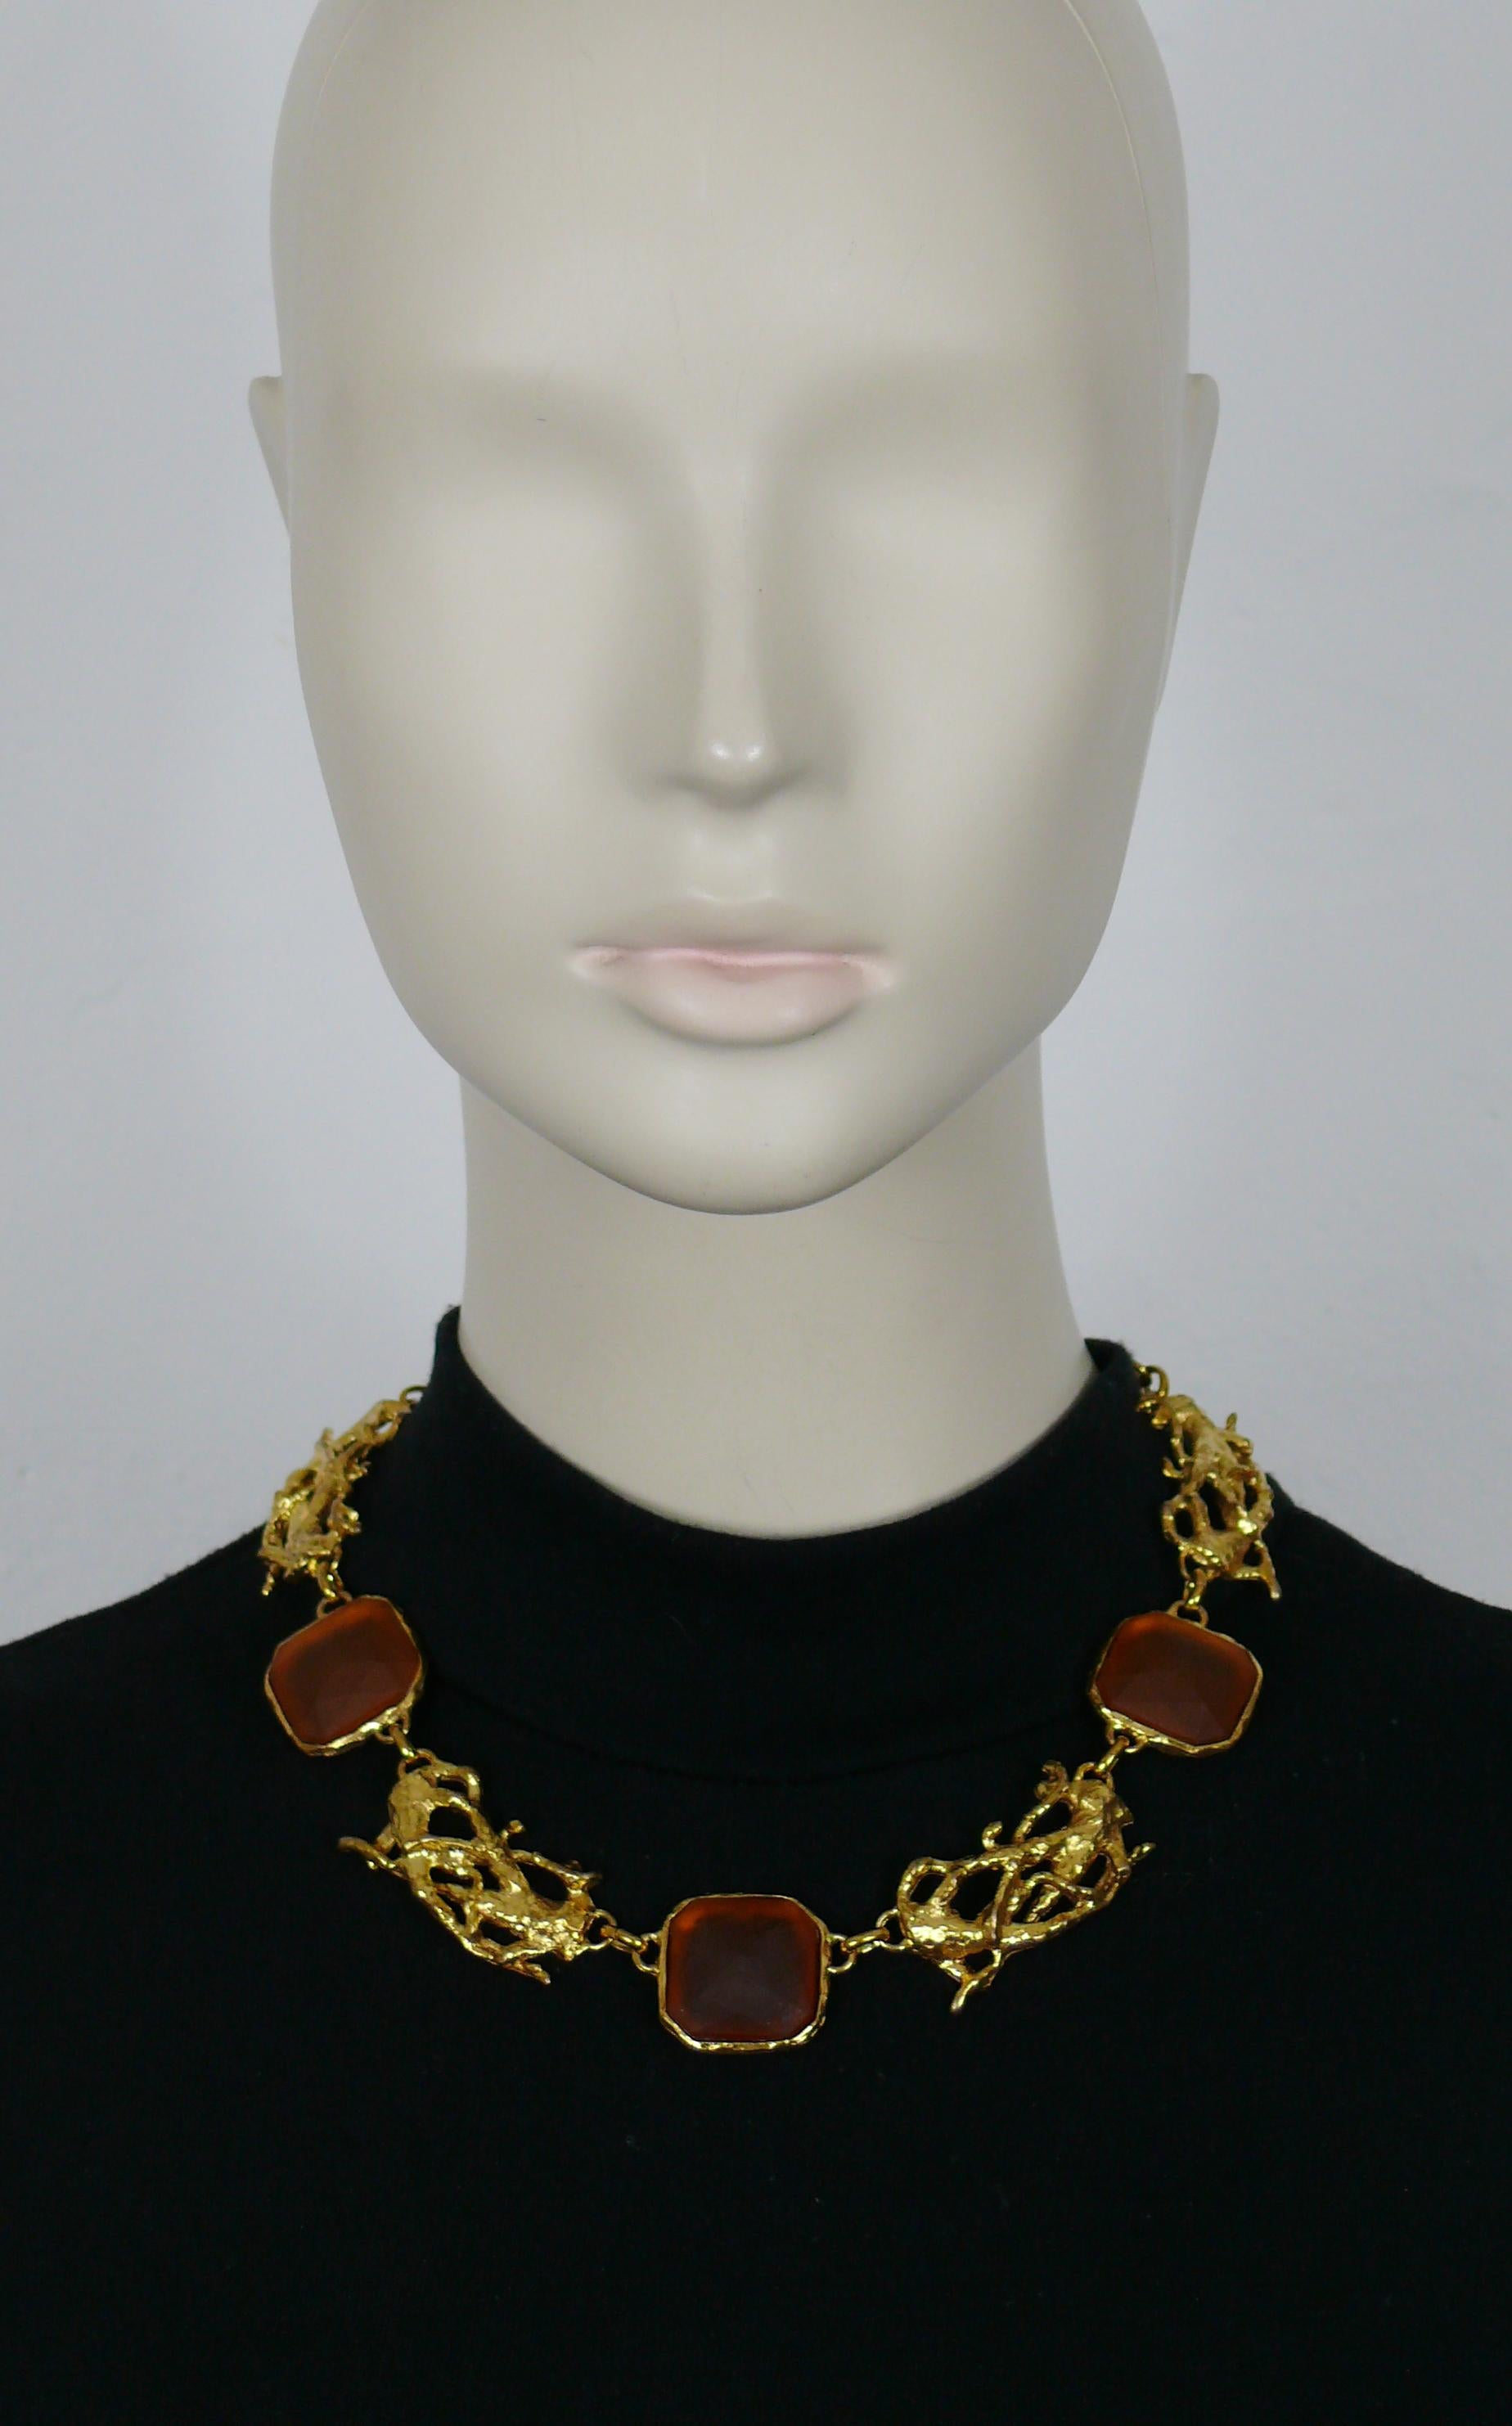 XAVIER LOUBENS vintage gold tone link necklace featuring an intricated design, embellished with 3 large frosted glass cabochons in amber colour. 

T-bar toggle loop closure.

Marked XAVIER LOUBENS Paris Made in France.

Indicative measurements :